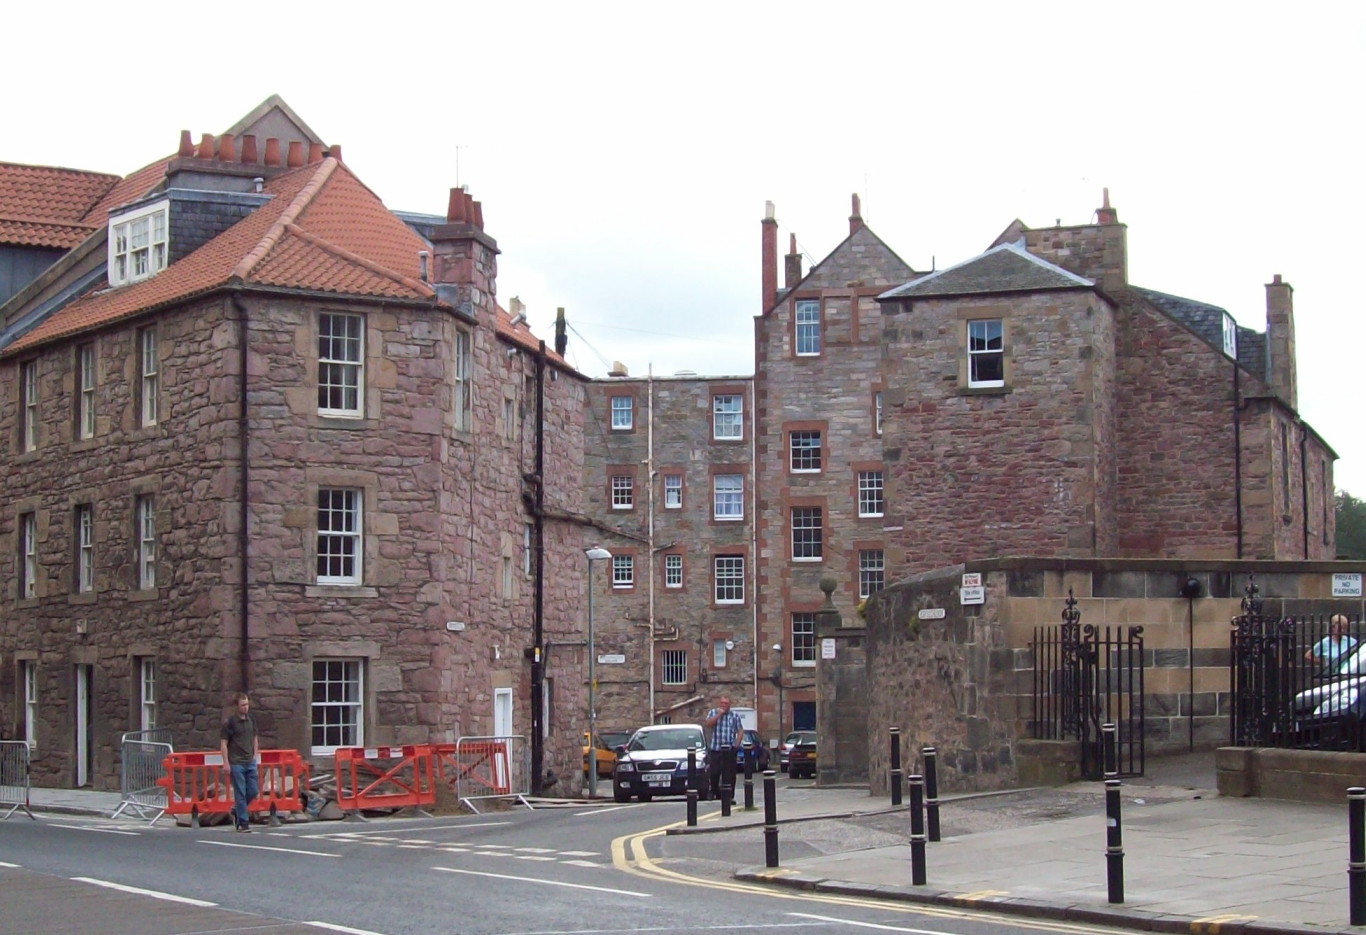 looking down a lane between a three-storey brown stone bulding on the left and a stone wall on the right: in the distance the lane splits, with the left fork leading into an enclosed yard with five-storey buildings of pale brown stone with red-brown trim round the windows, and the right fork winding away out of sight